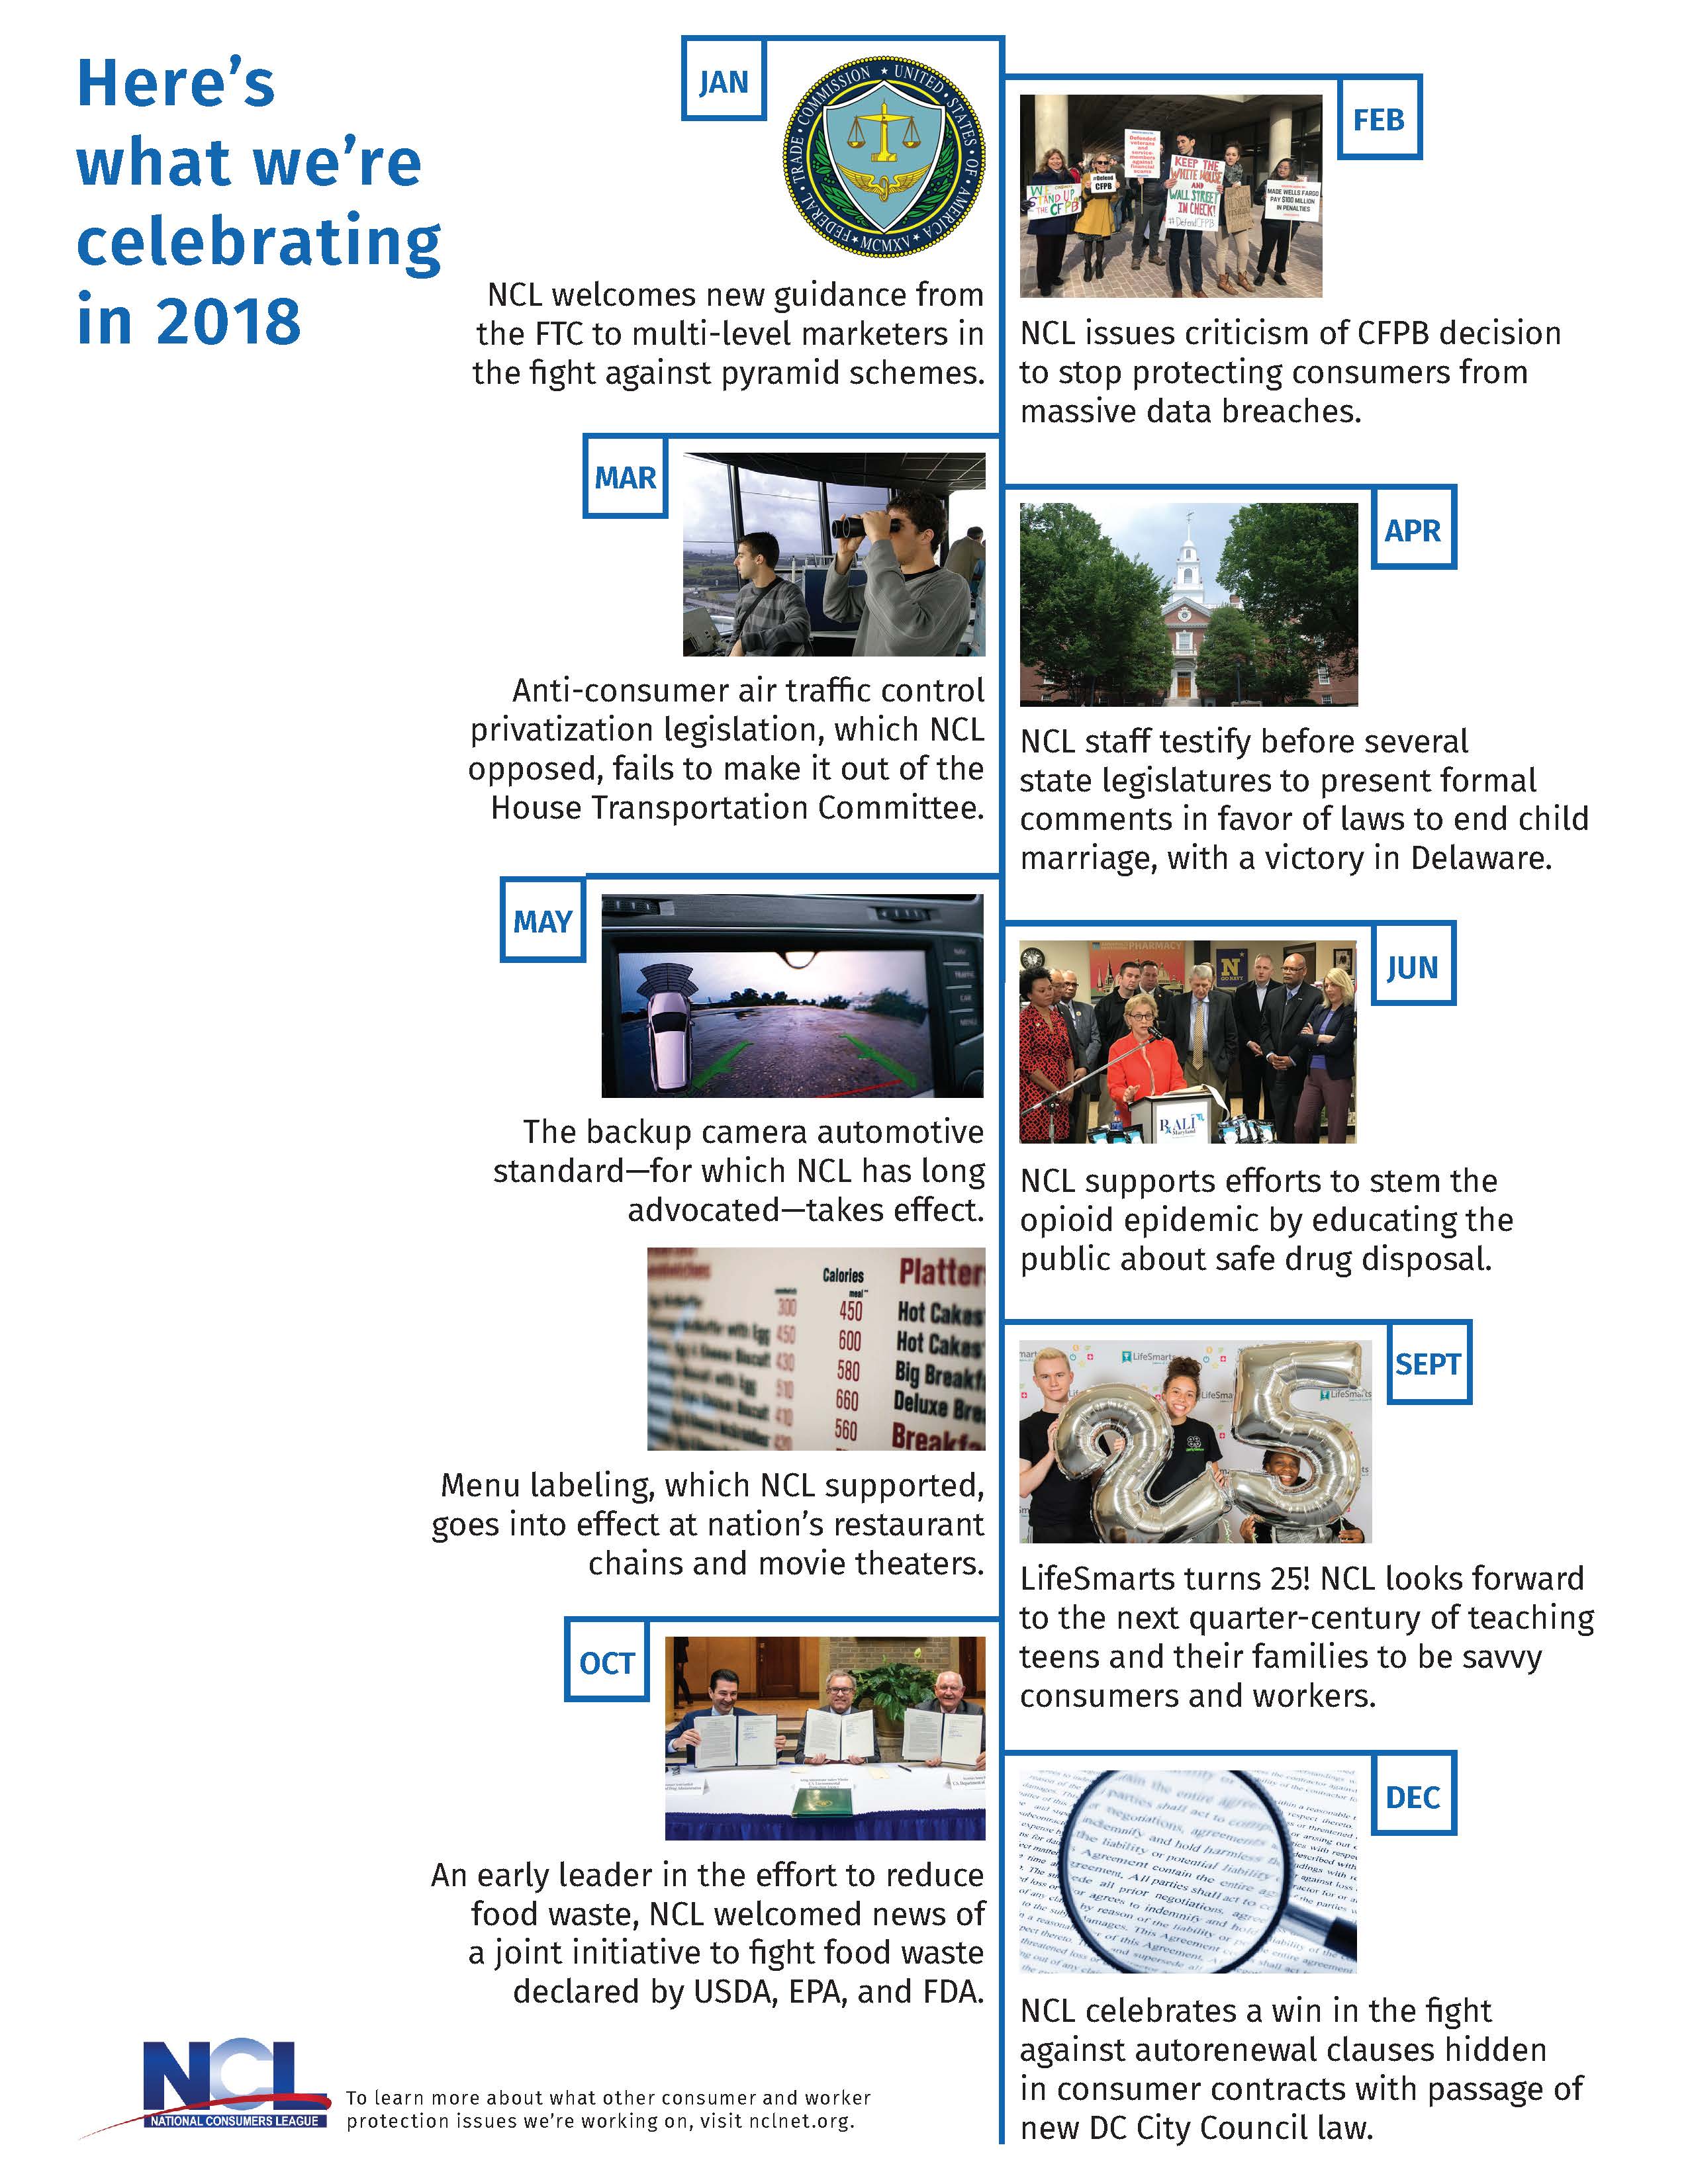 Brief timeline of National Consumers League victories in 2018